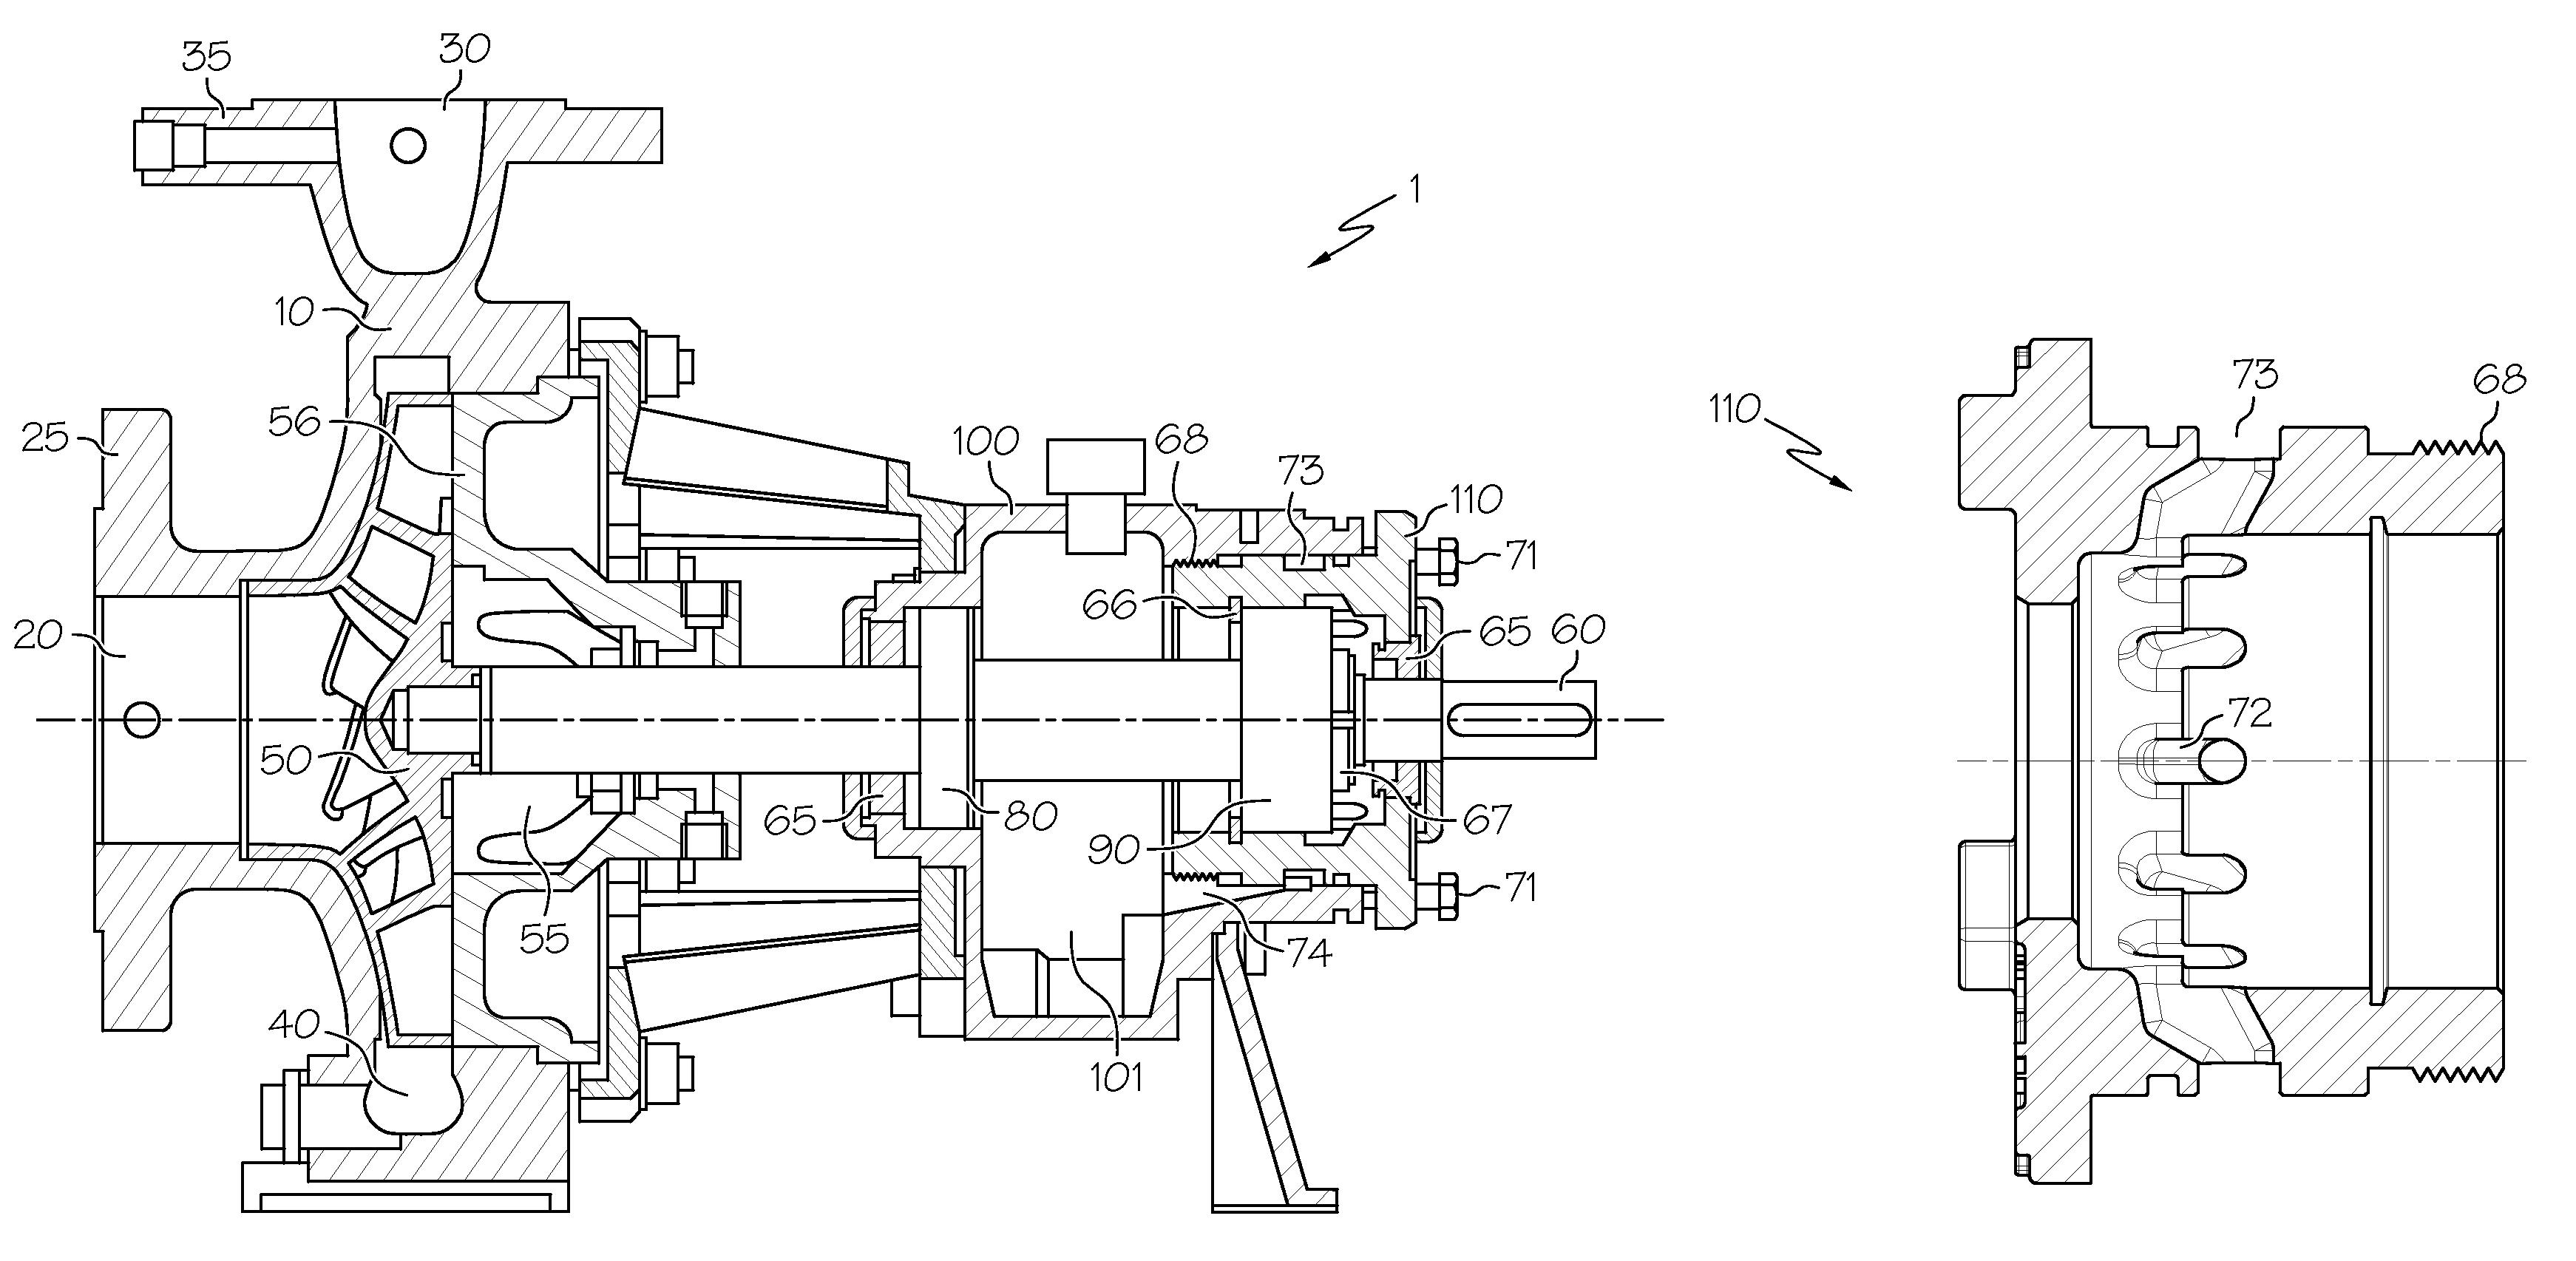 Bearing carrier with multiple lubrication slots